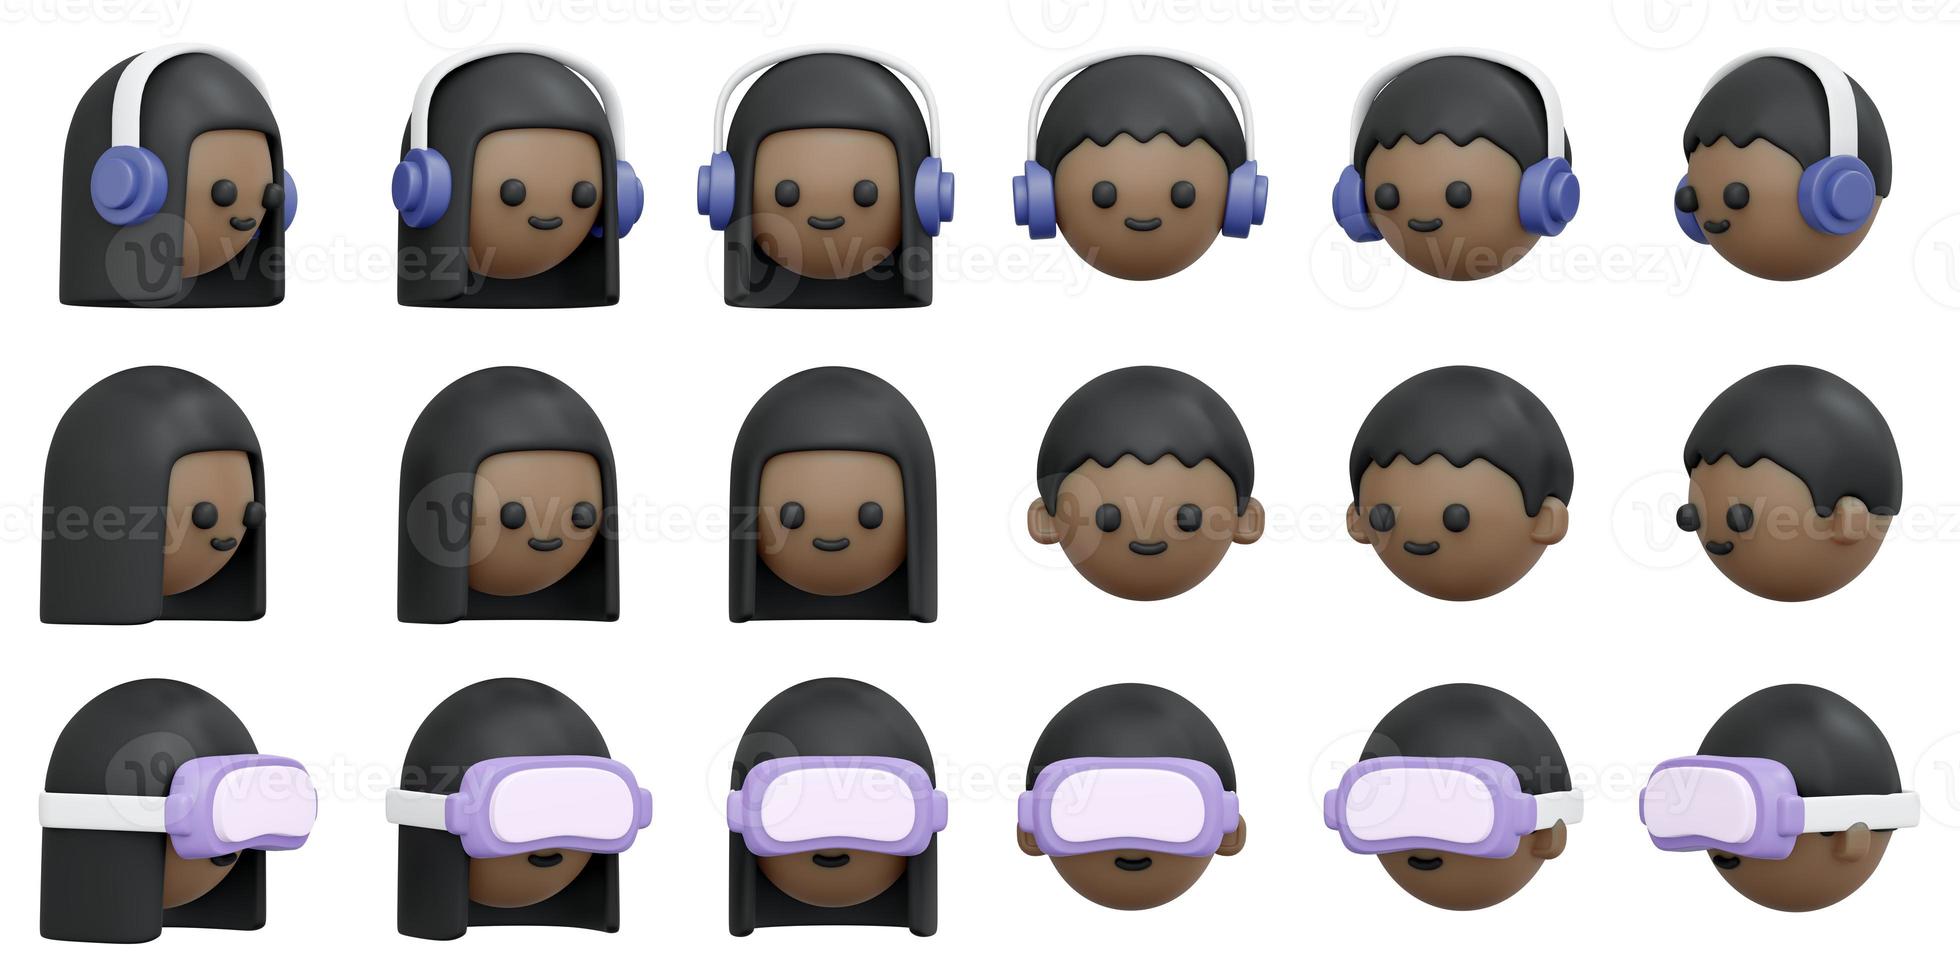 3D Rendering collection of African American of male and female face rotate in many views animation with VR metaverse glasses and headphone isolate on white background. 3D Render illustration cartoon photo